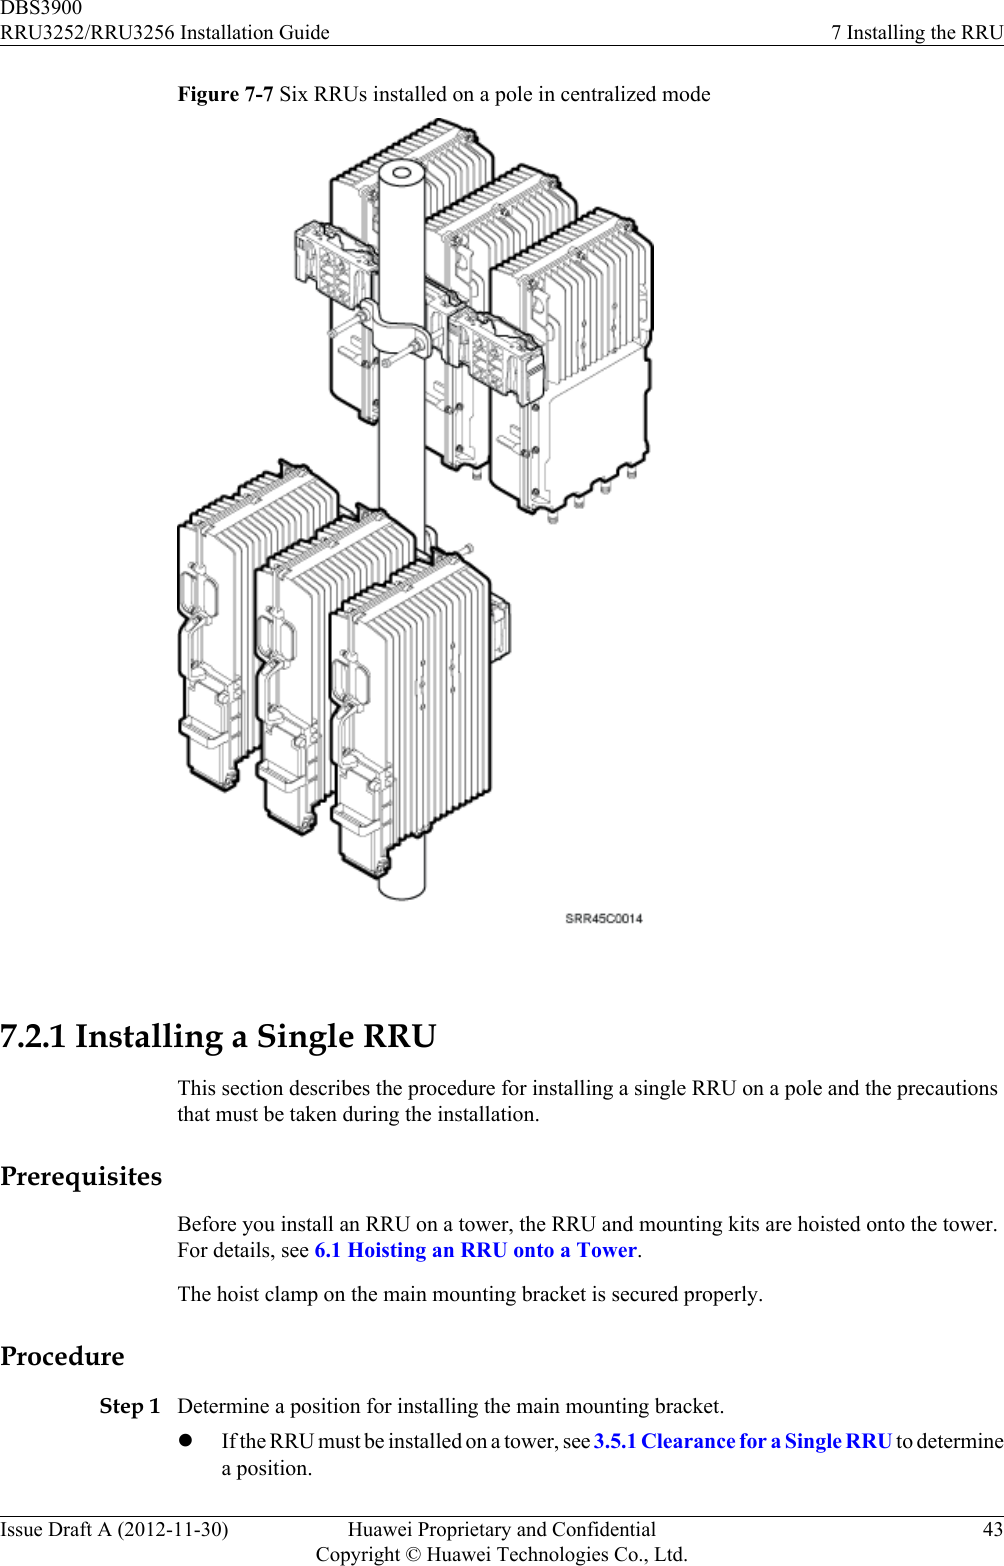 Figure 7-7 Six RRUs installed on a pole in centralized mode 7.2.1 Installing a Single RRUThis section describes the procedure for installing a single RRU on a pole and the precautionsthat must be taken during the installation.PrerequisitesBefore you install an RRU on a tower, the RRU and mounting kits are hoisted onto the tower.For details, see 6.1 Hoisting an RRU onto a Tower.The hoist clamp on the main mounting bracket is secured properly.ProcedureStep 1 Determine a position for installing the main mounting bracket.lIf the RRU must be installed on a tower, see 3.5.1 Clearance for a Single RRU to determinea position.DBS3900RRU3252/RRU3256 Installation Guide 7 Installing the RRUIssue Draft A (2012-11-30) Huawei Proprietary and ConfidentialCopyright © Huawei Technologies Co., Ltd.43